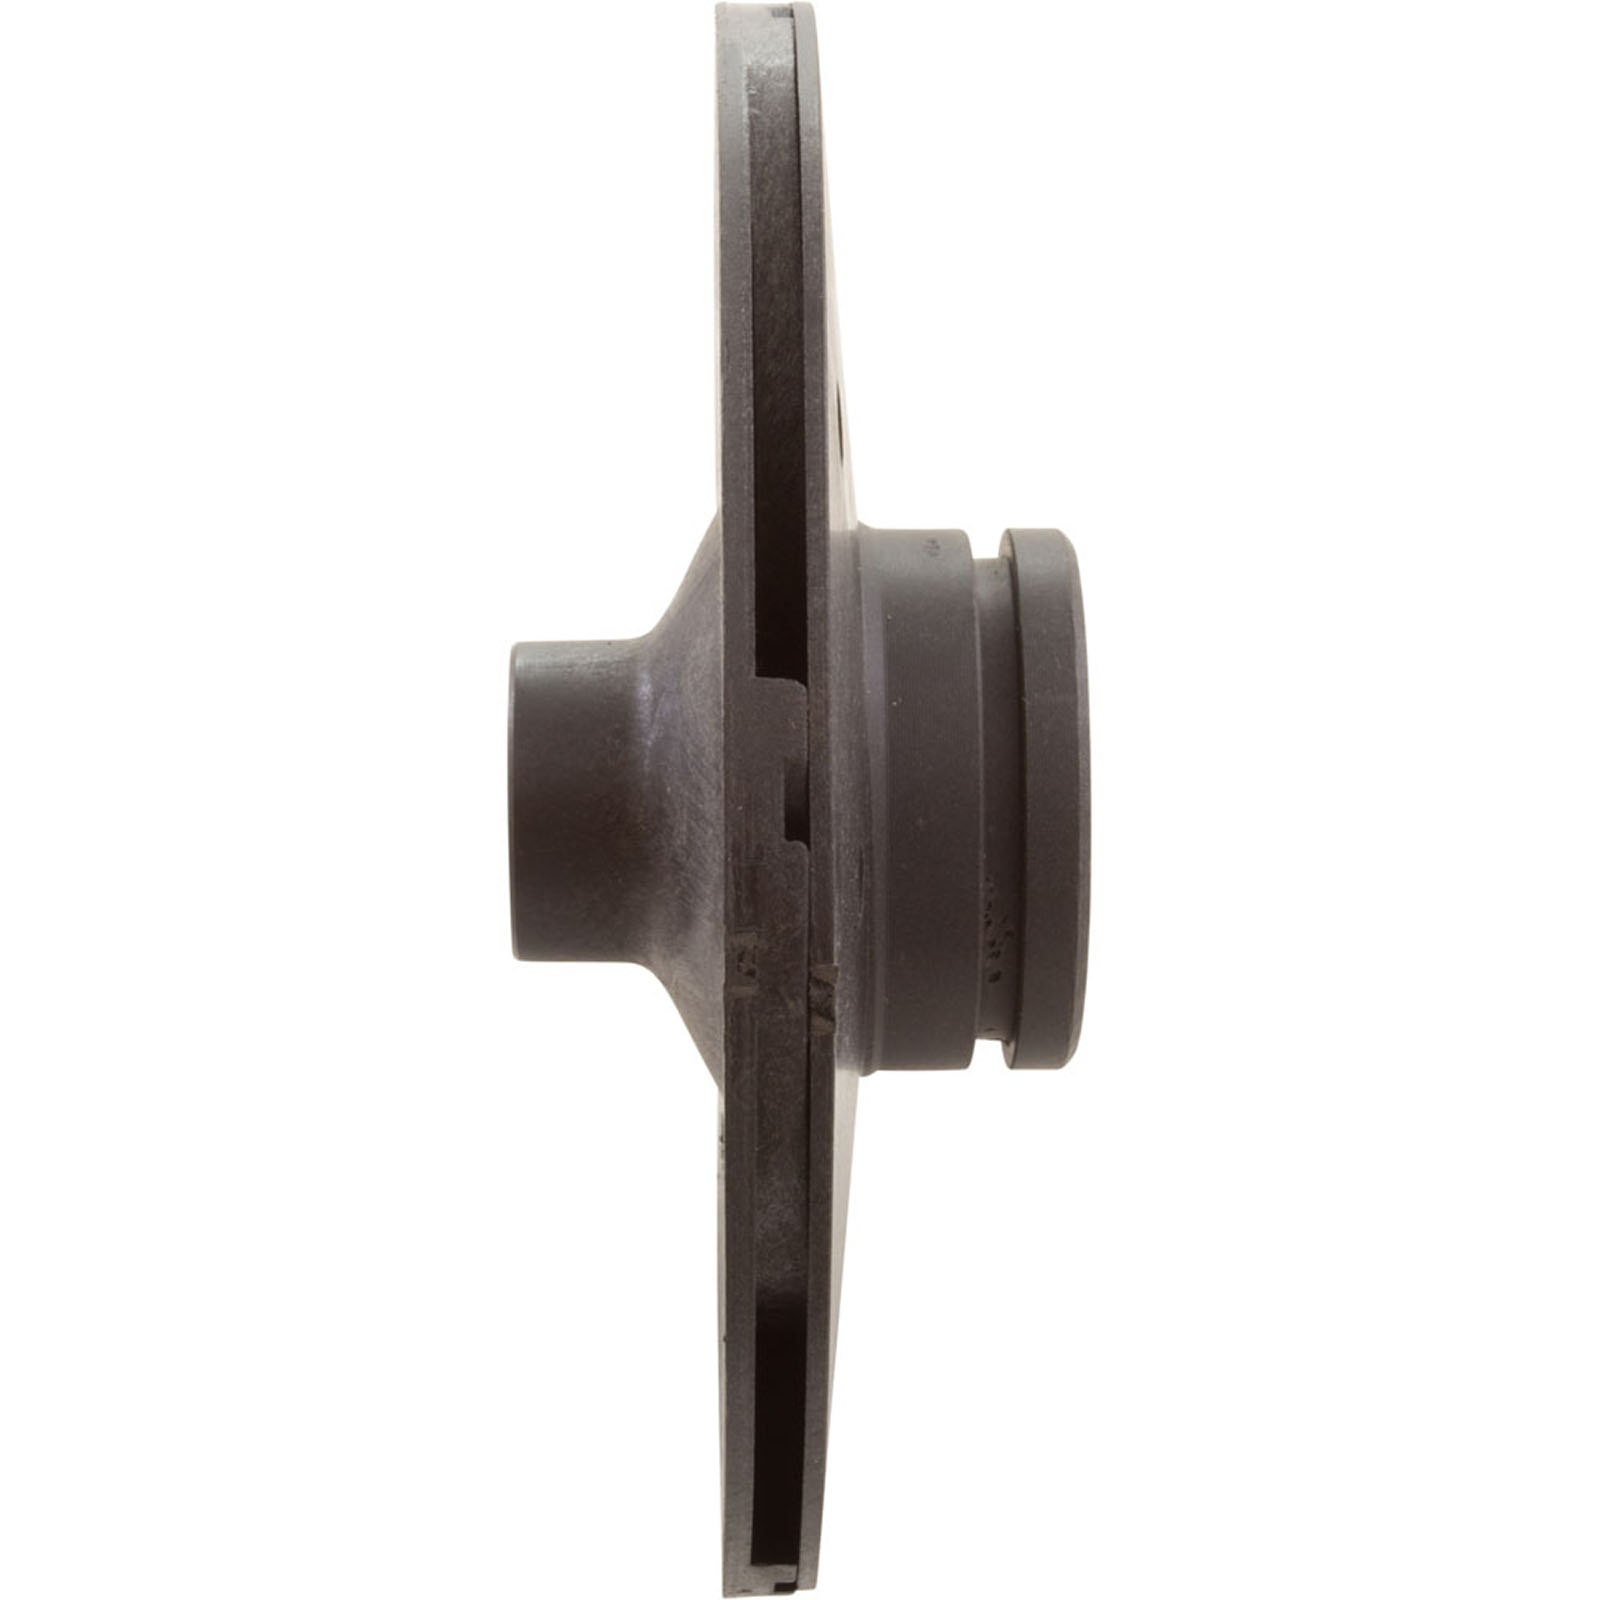 Water ace Impeller, Water Ace, 1/2 Threaded Shaft